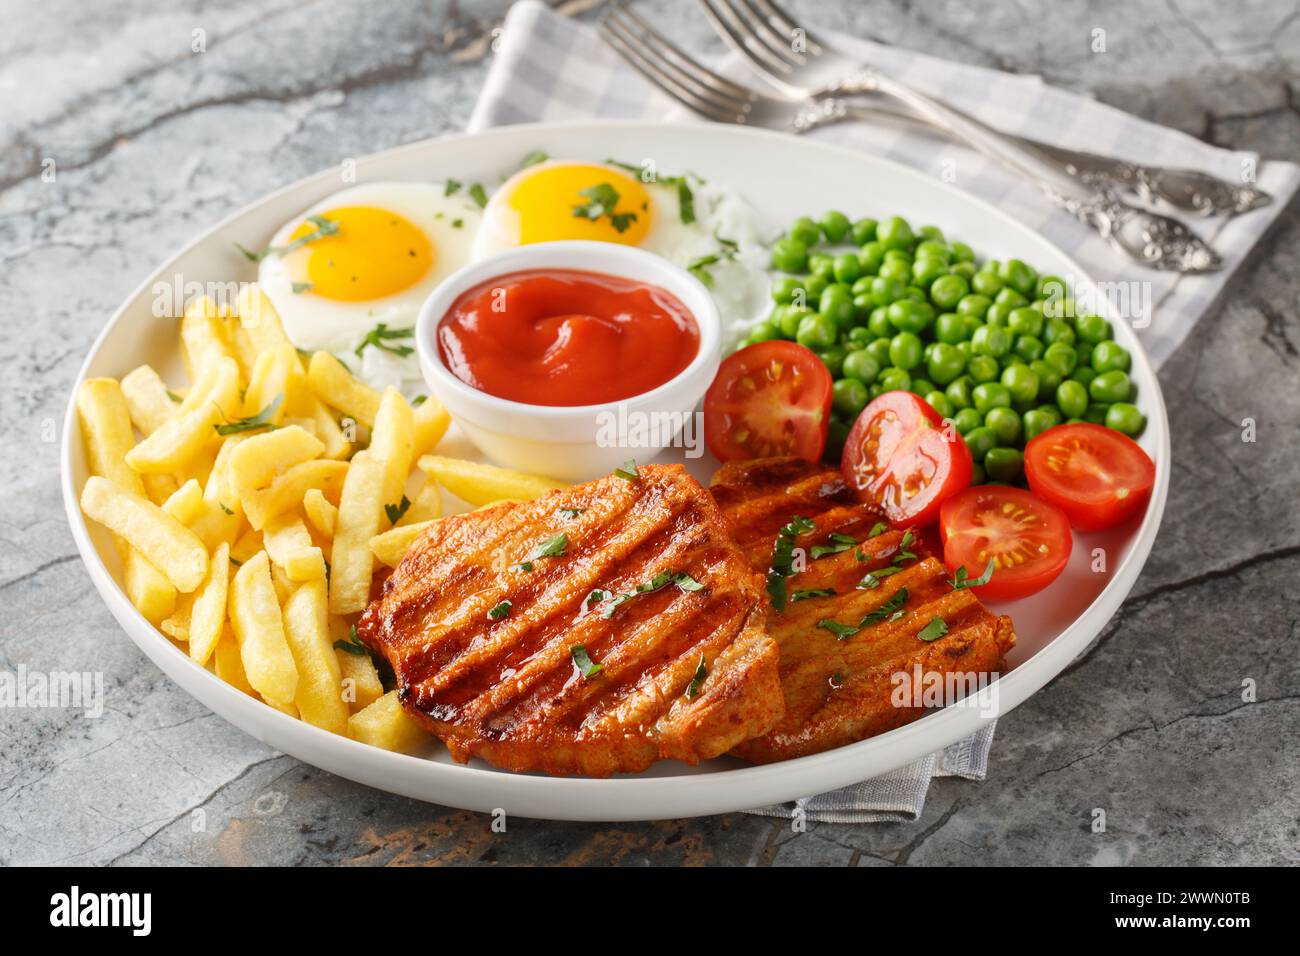 Tender grilled steak served with crisp golden French fries, fied eggs, green pea and fresh tomato closeup on the plate on the table. Horizontal Stock Photo